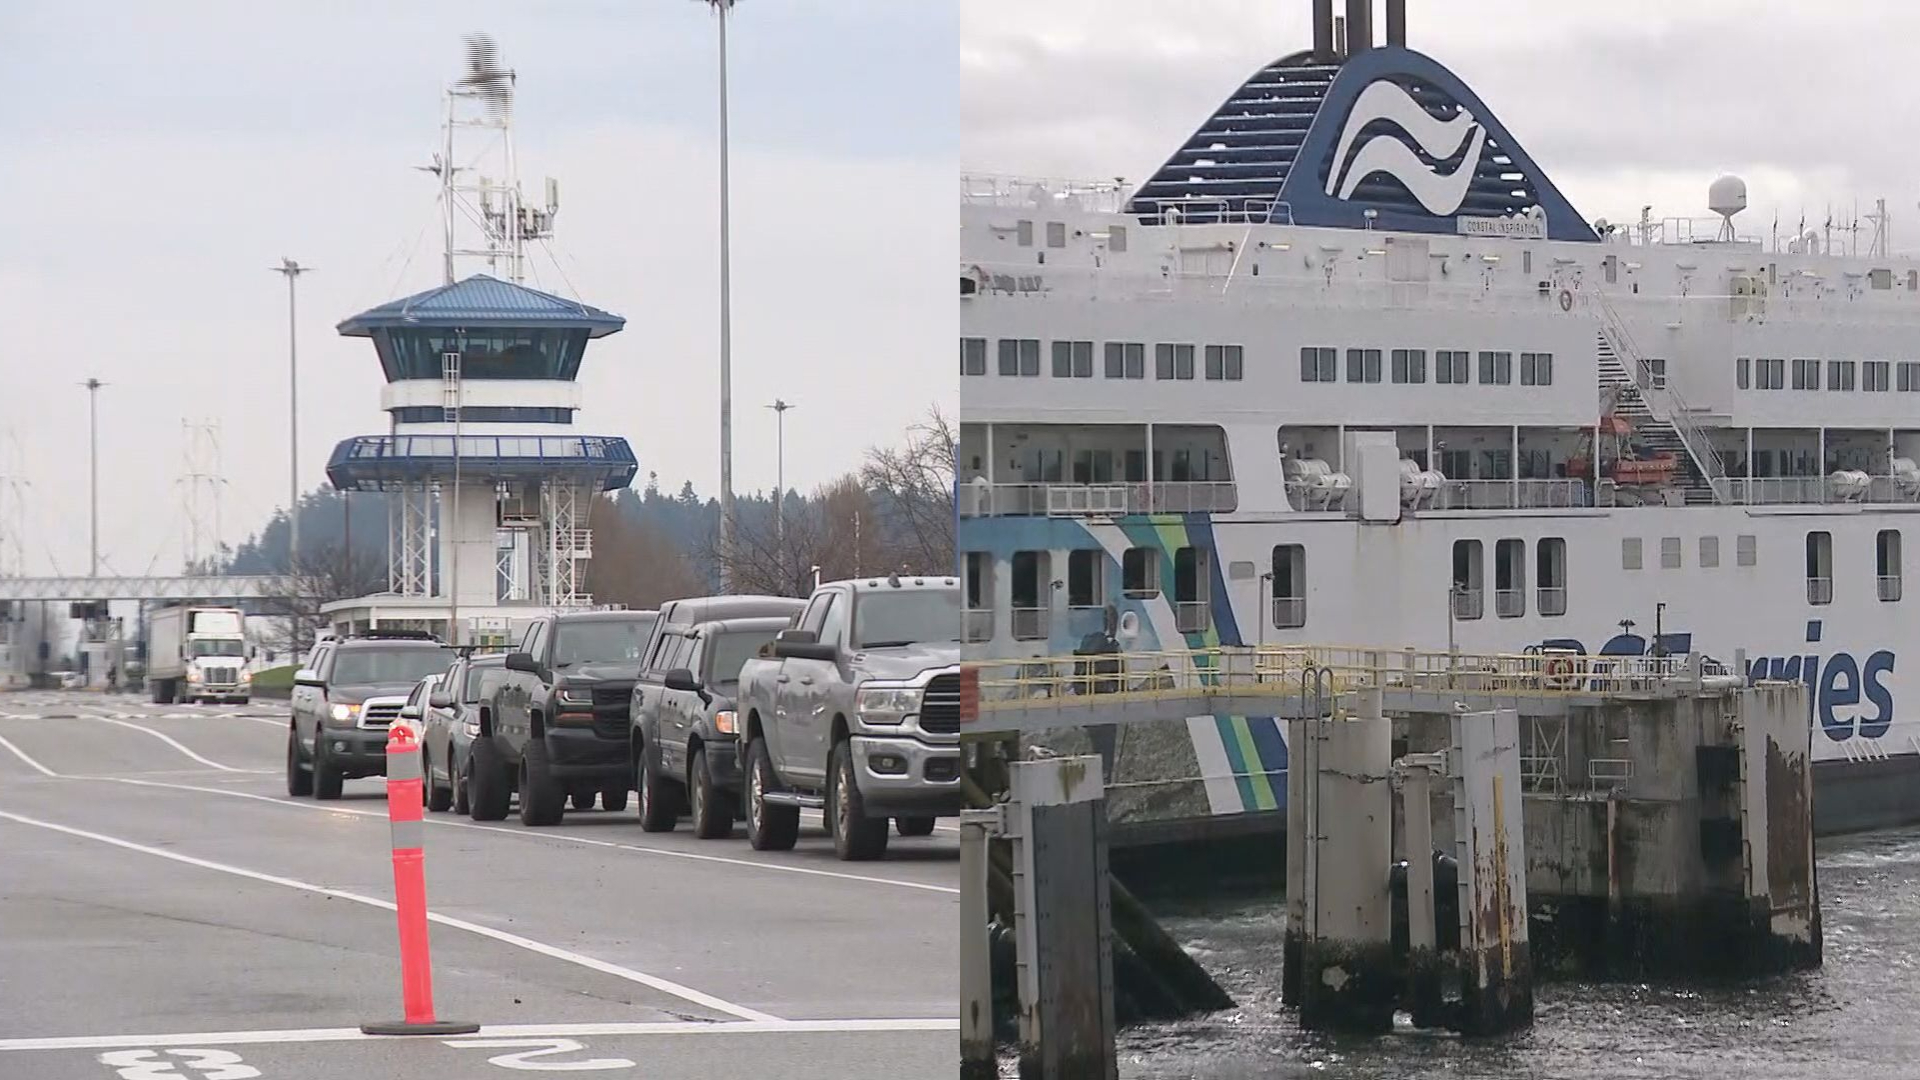 BC Ferries promises smoother sailings this summer